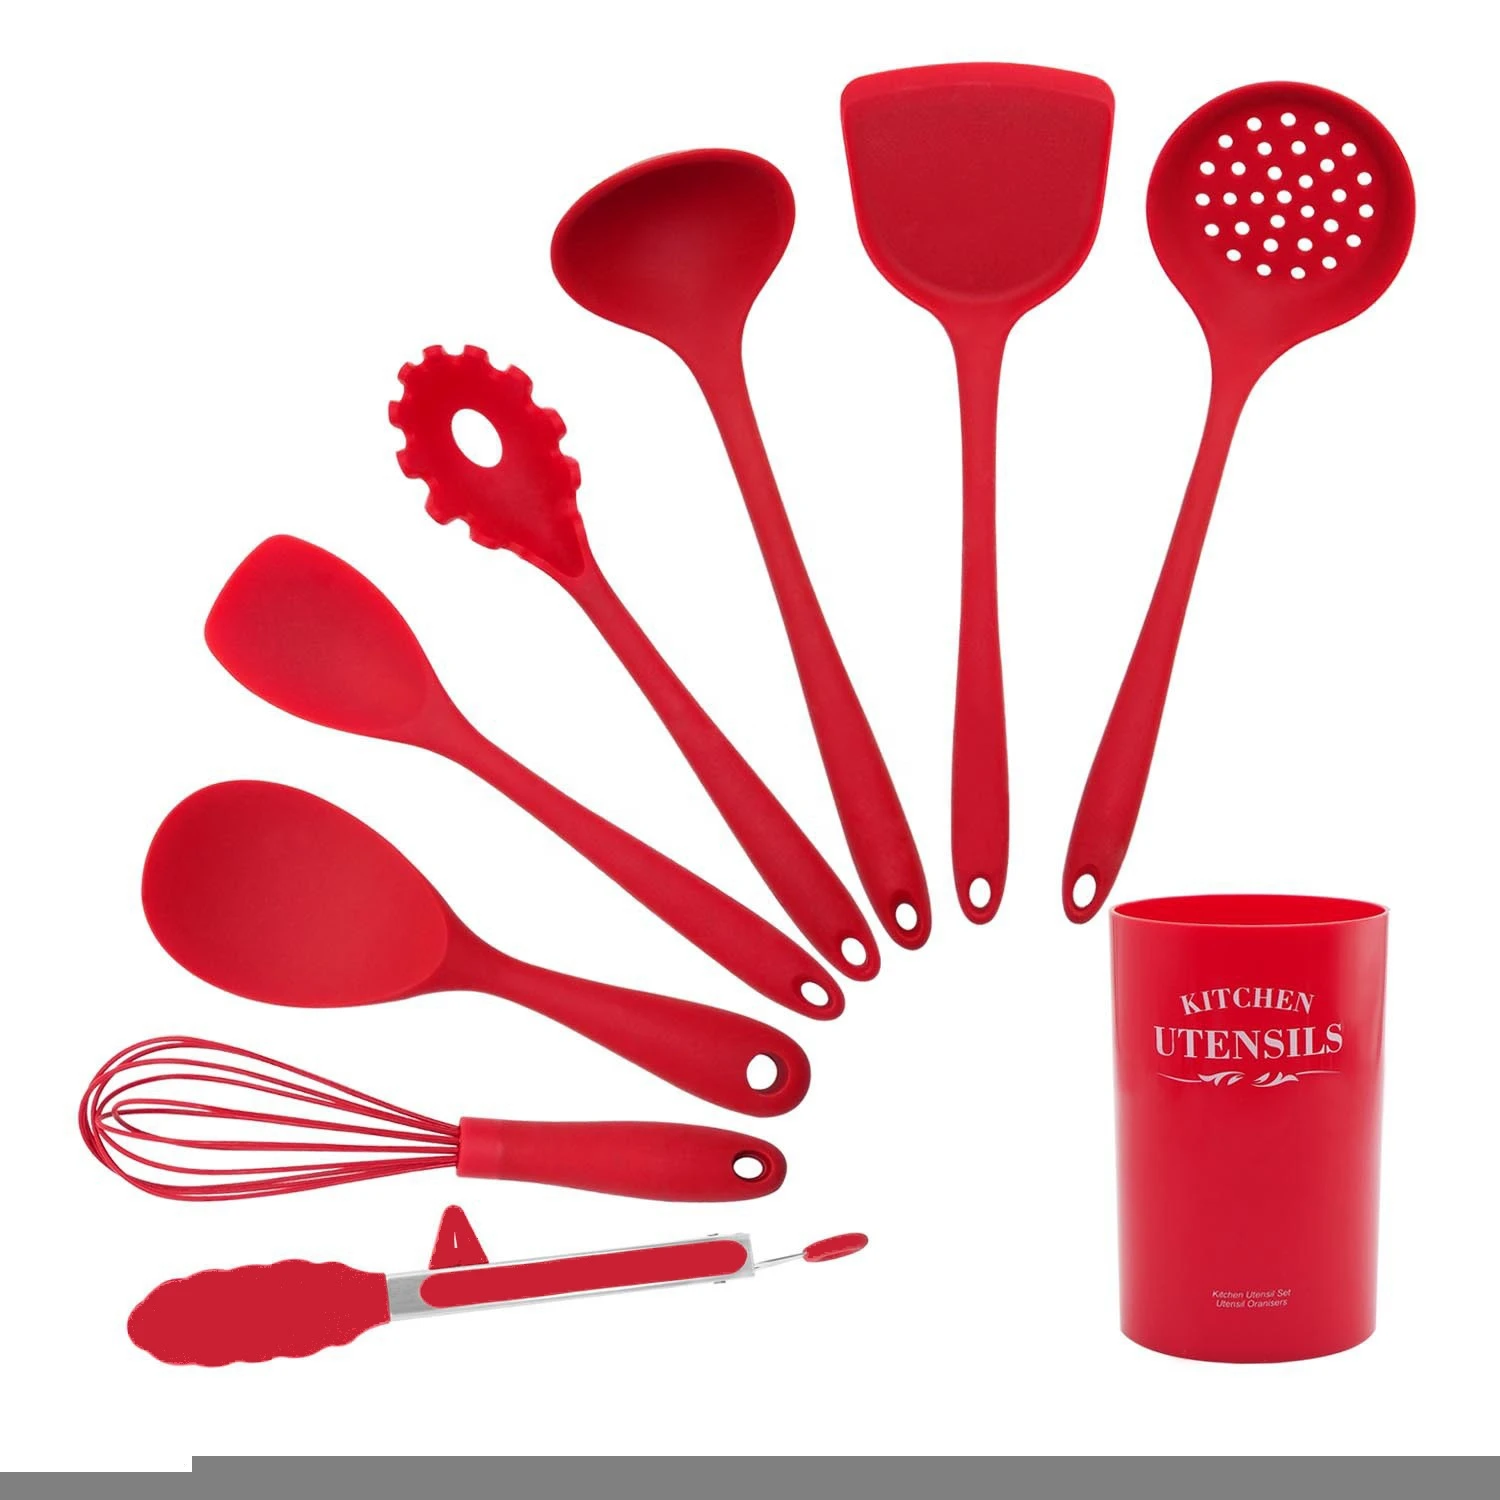 BPA Free Corrosion Resistant Silicone Kitchen cookware 11 pieces Cooking Utensils Set